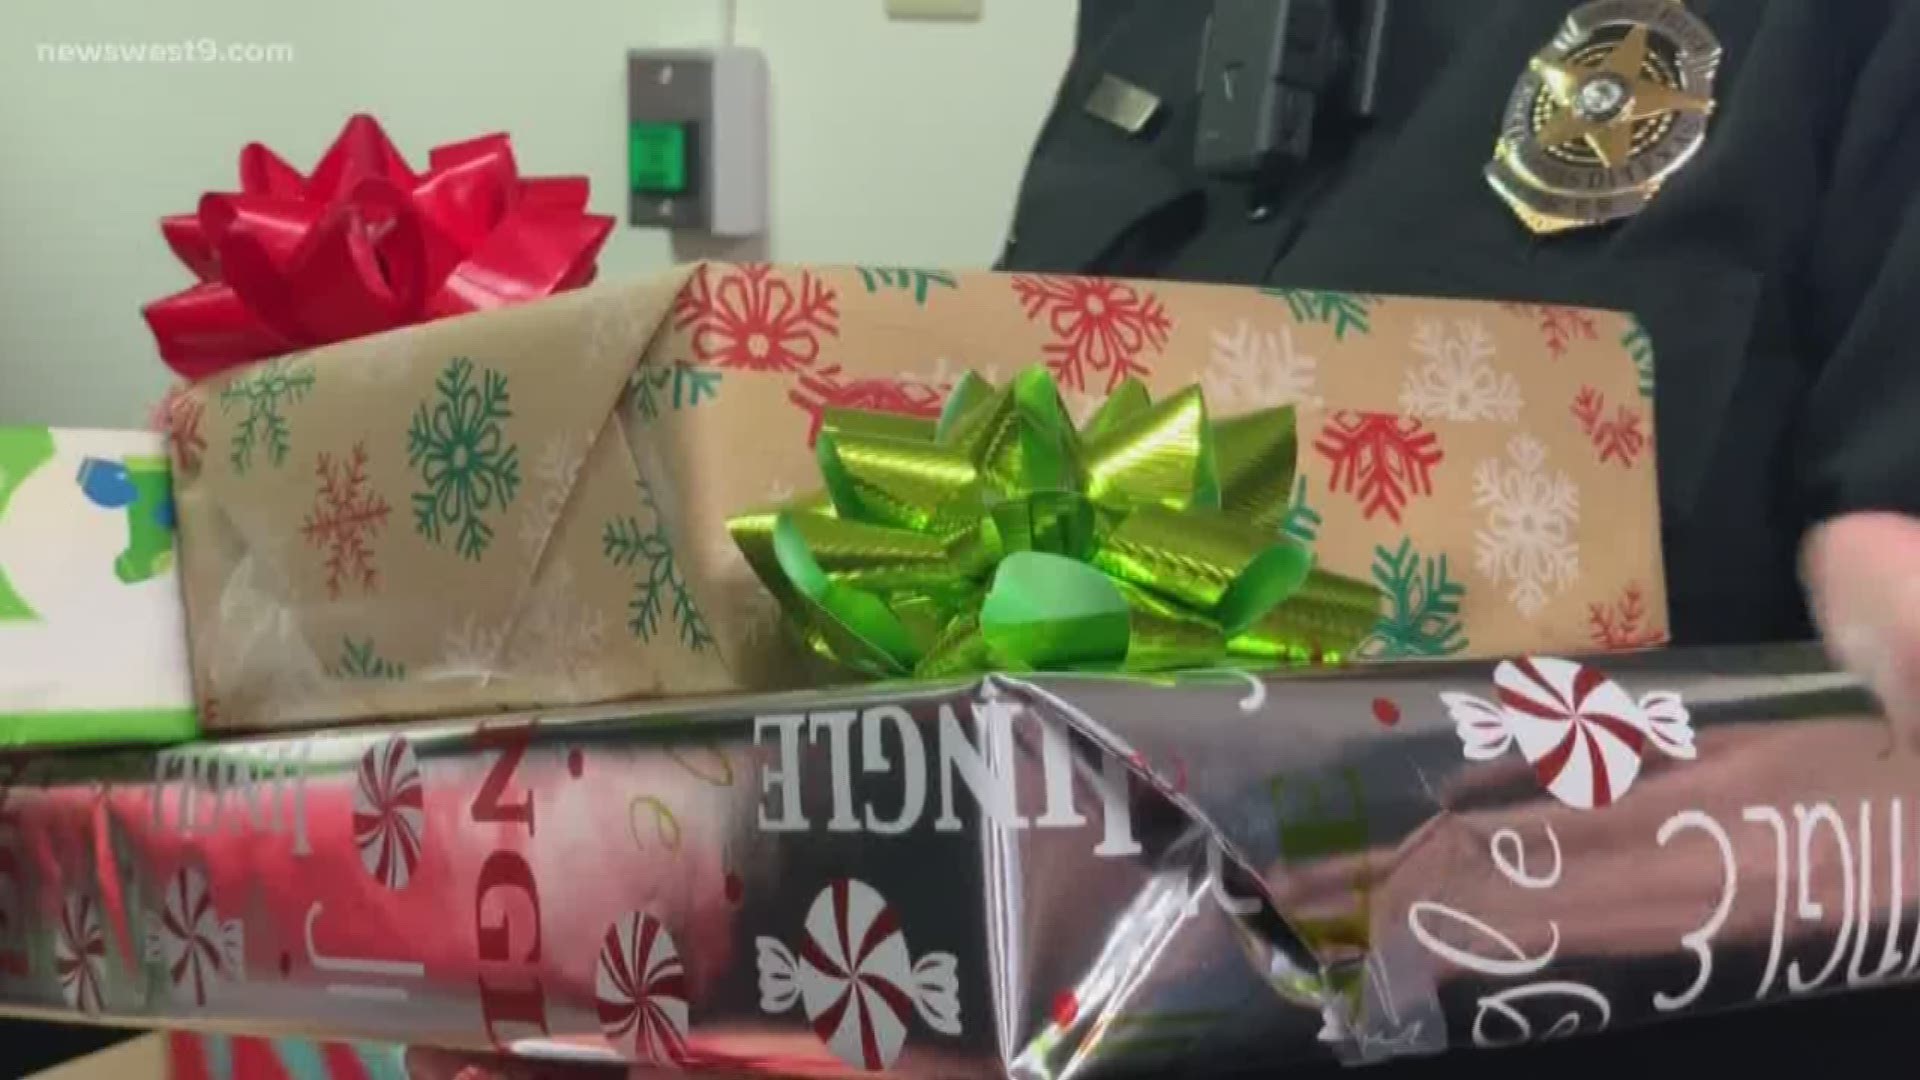 The police department works with ECISD Community Outreach Center to identify struggling families to buy them presents.